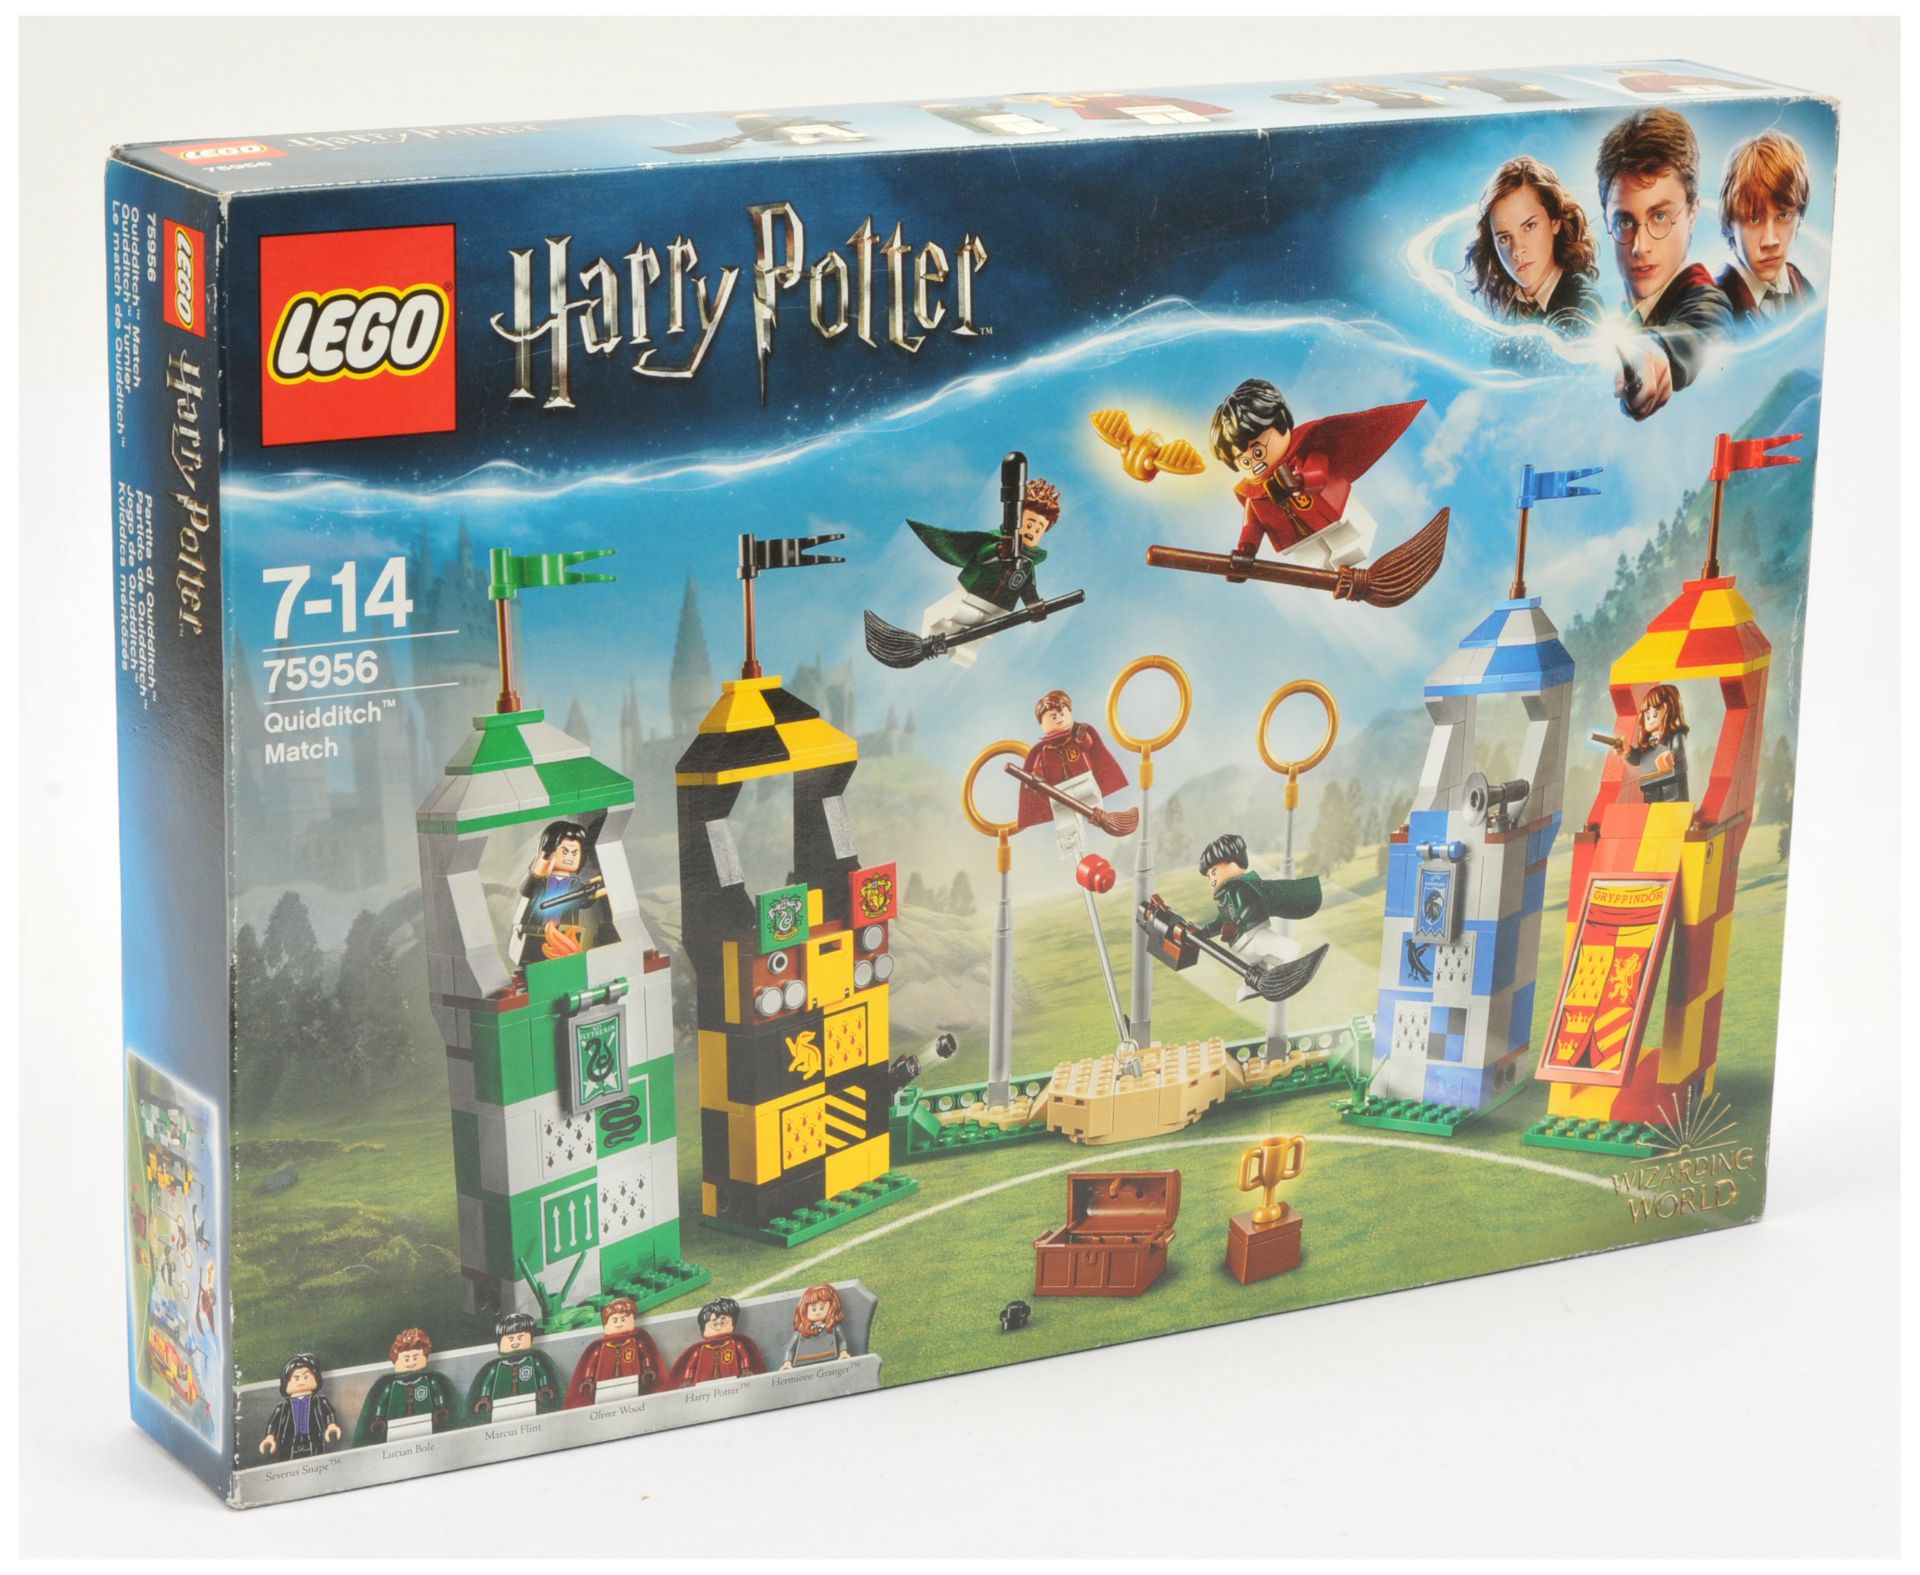 Lego Harry Potter 75956 Quidditch Match, within Good sealed packaging.